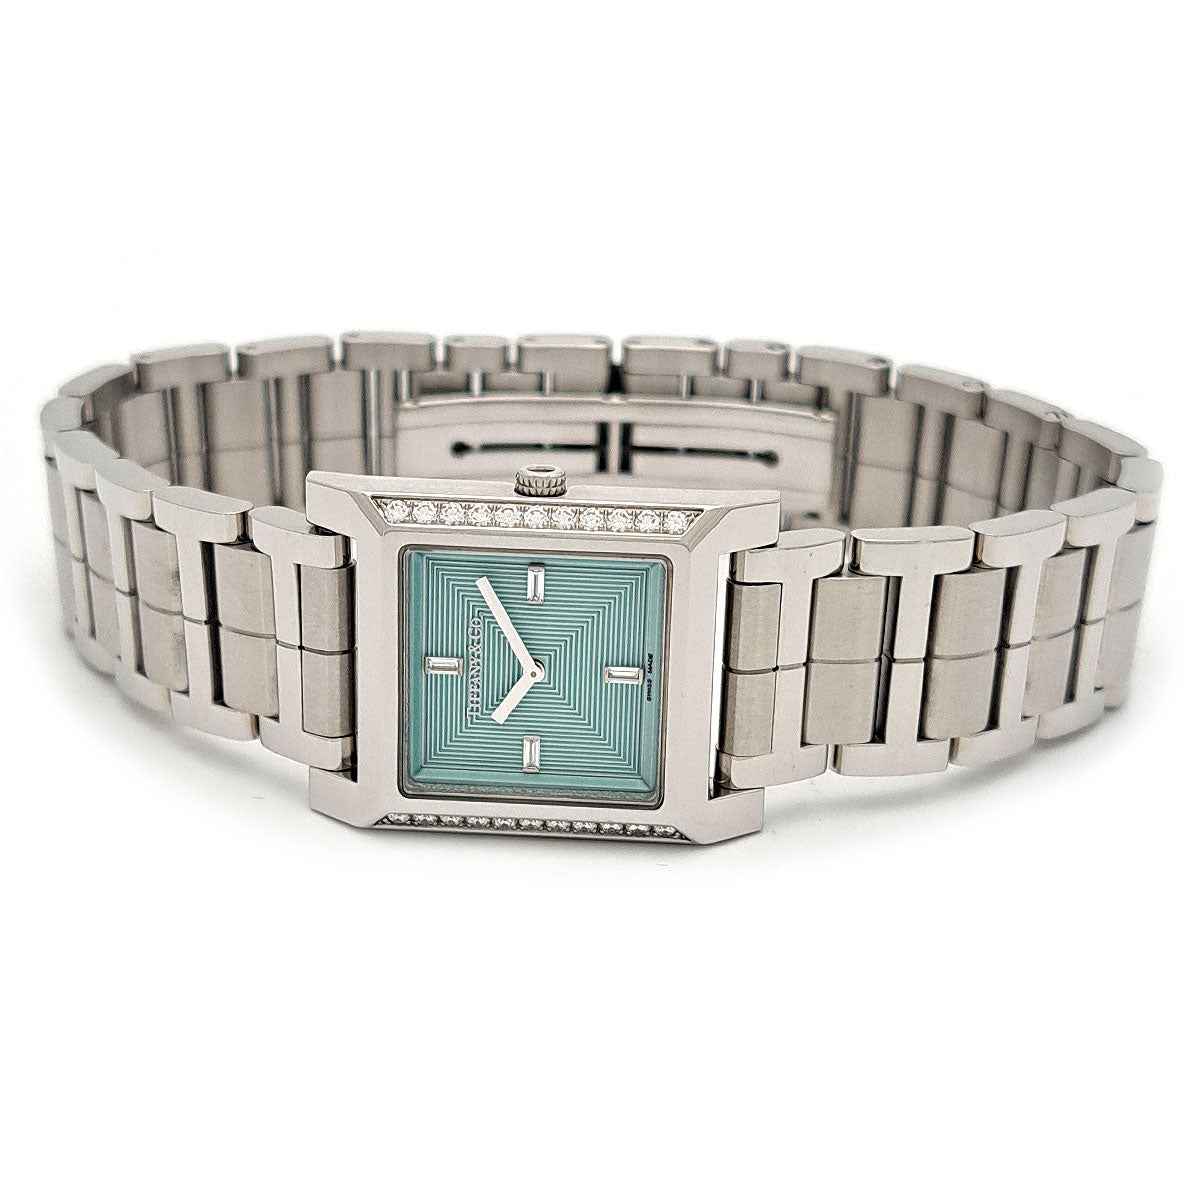 Tiffany & Co Makers Square Ladies Watch with Bezel Diamond 67460537, Quartz, Stainless Steel (Pre-Owned) 6.7460537E7